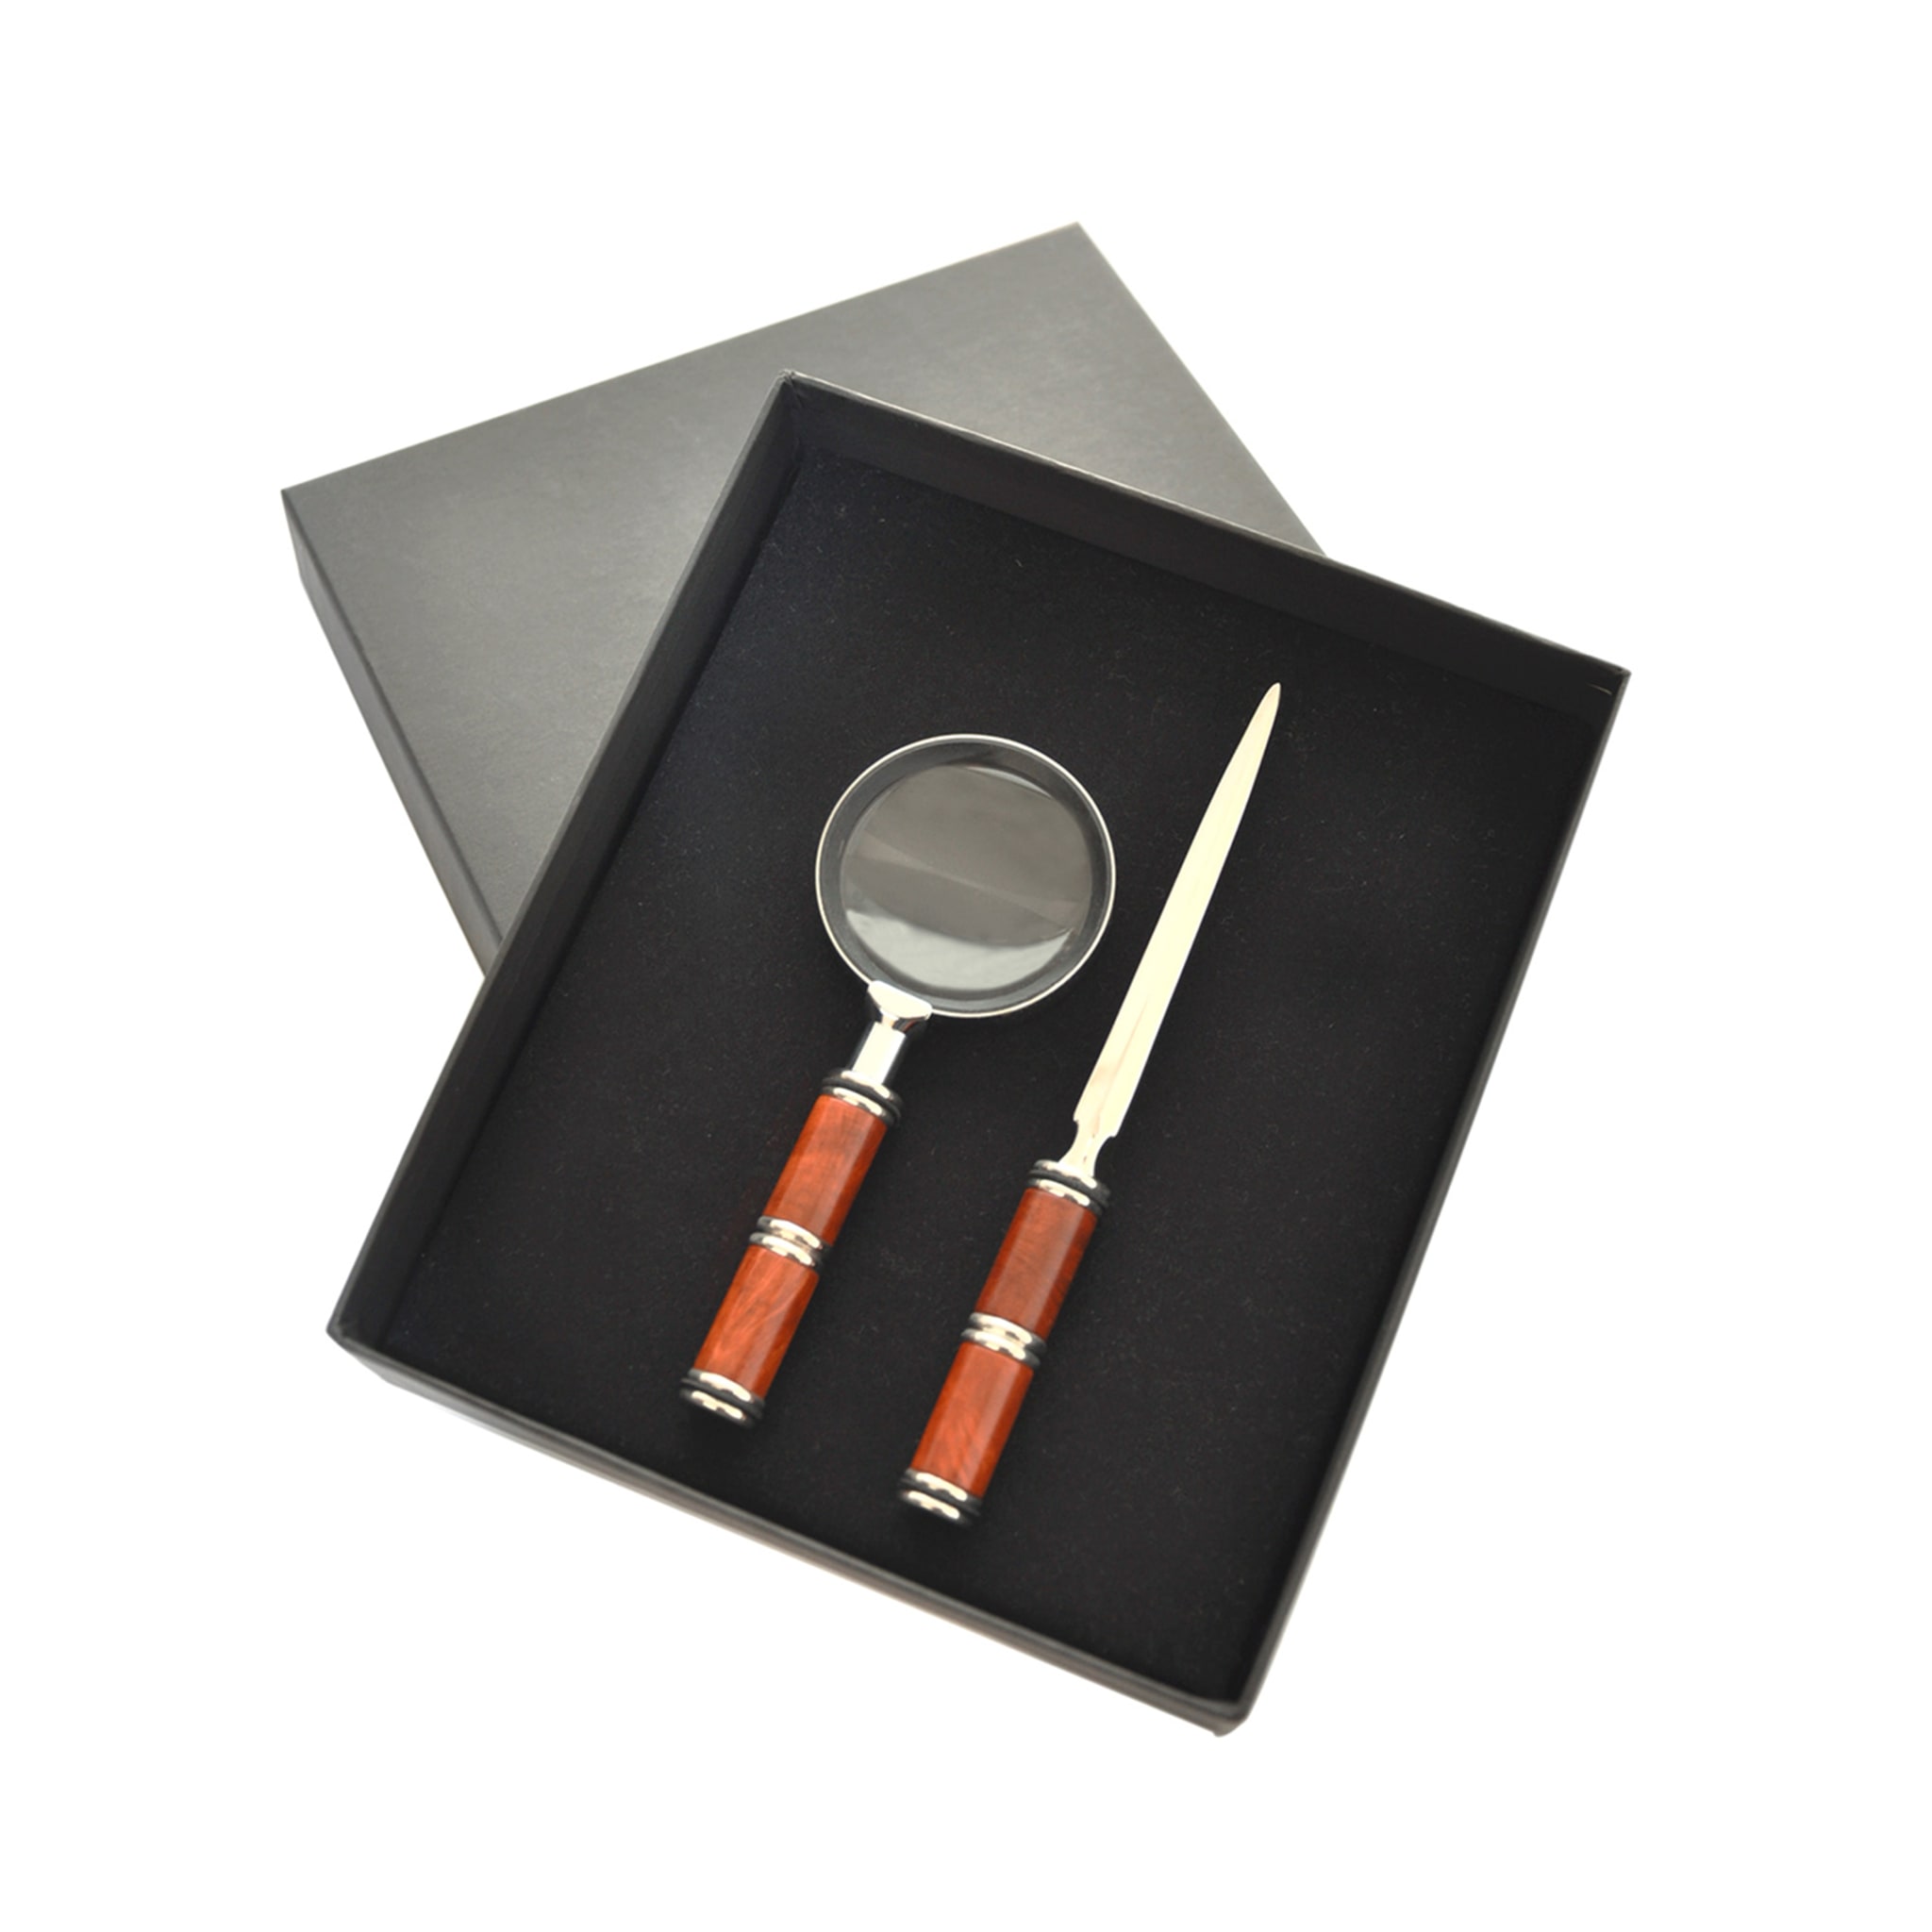 Heather Briar Set of Magnifying Glass and Paper Knife by N. Basso - Alternative view 2